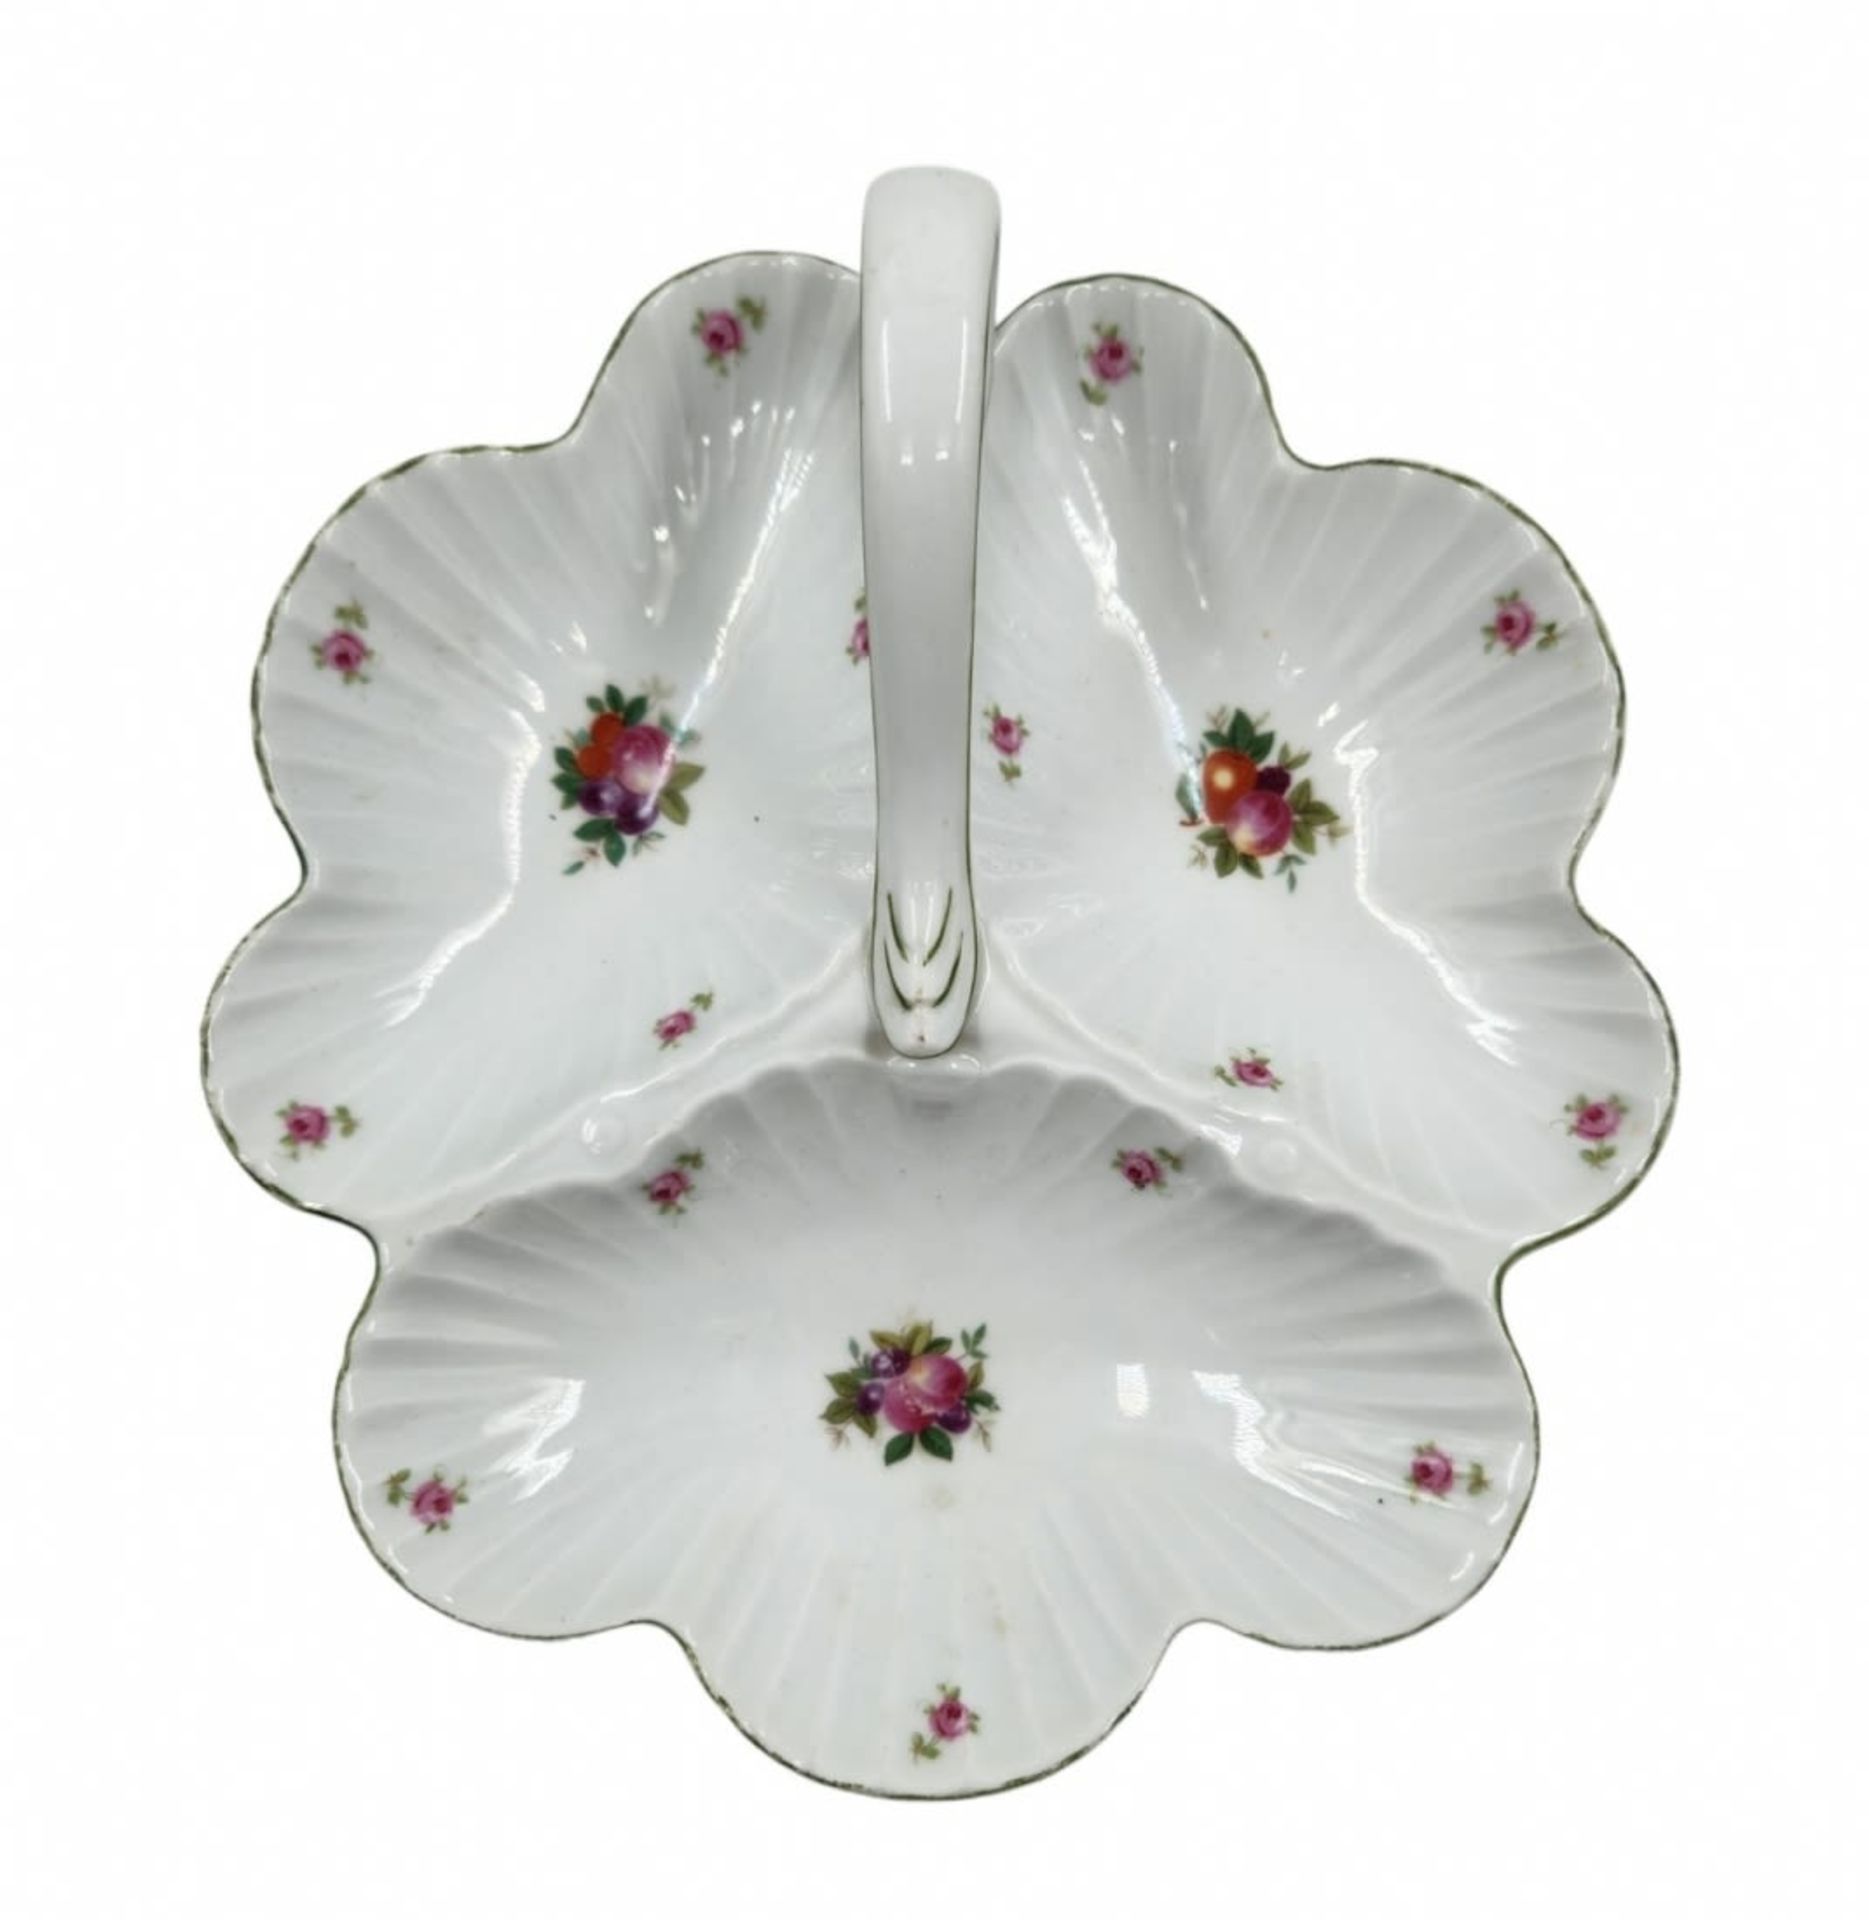 Three-compartment porcelain tray, decorated with fruit prints and a green stripe for the saying, not